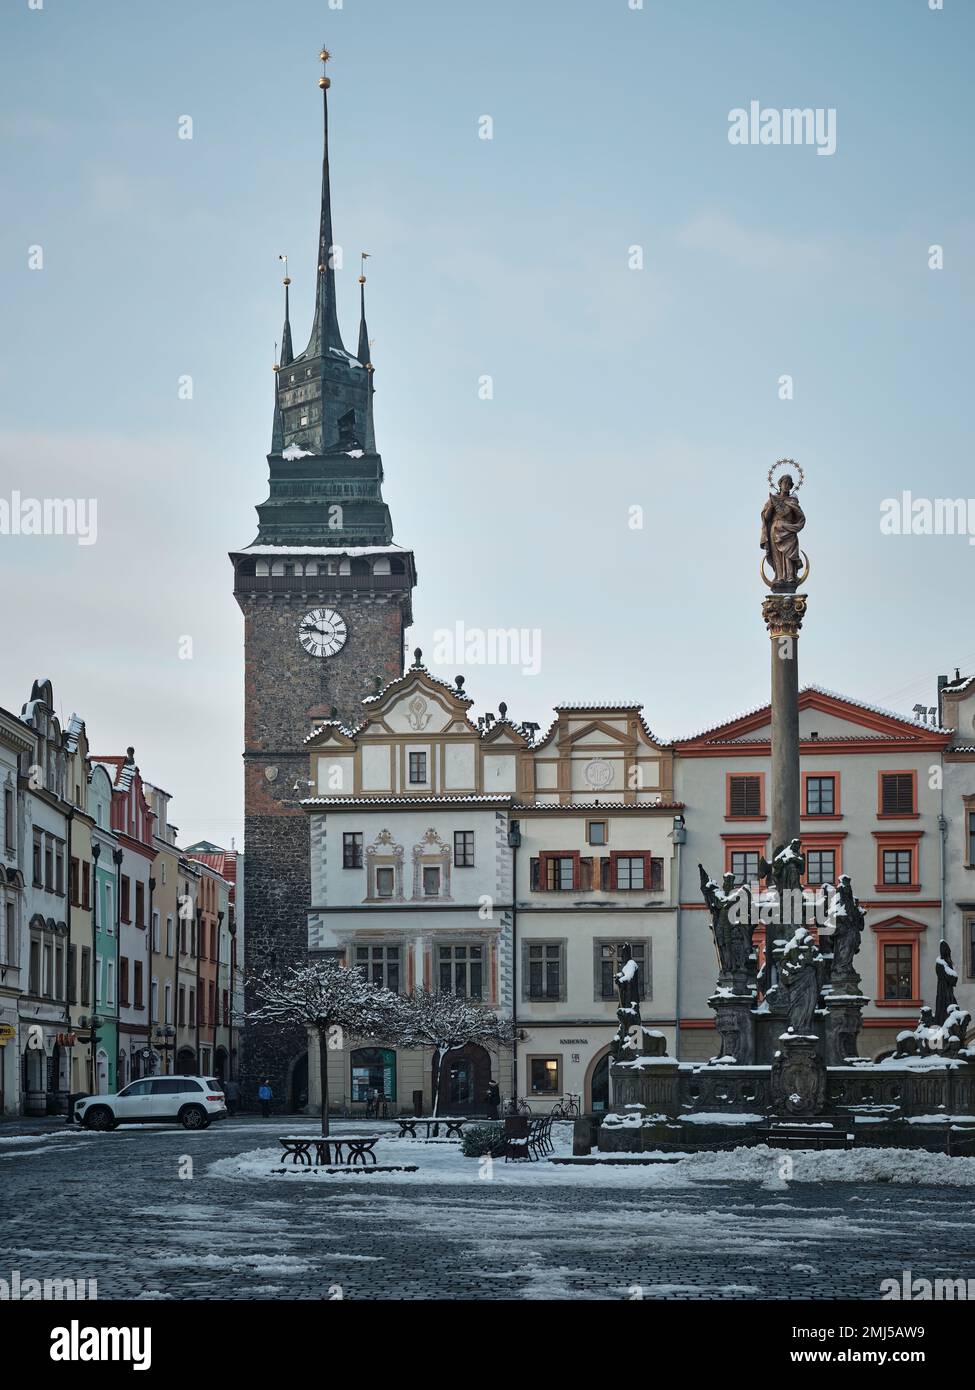 Square and observation tower with a clock in Pardubice, Czech Republic Stock Photo